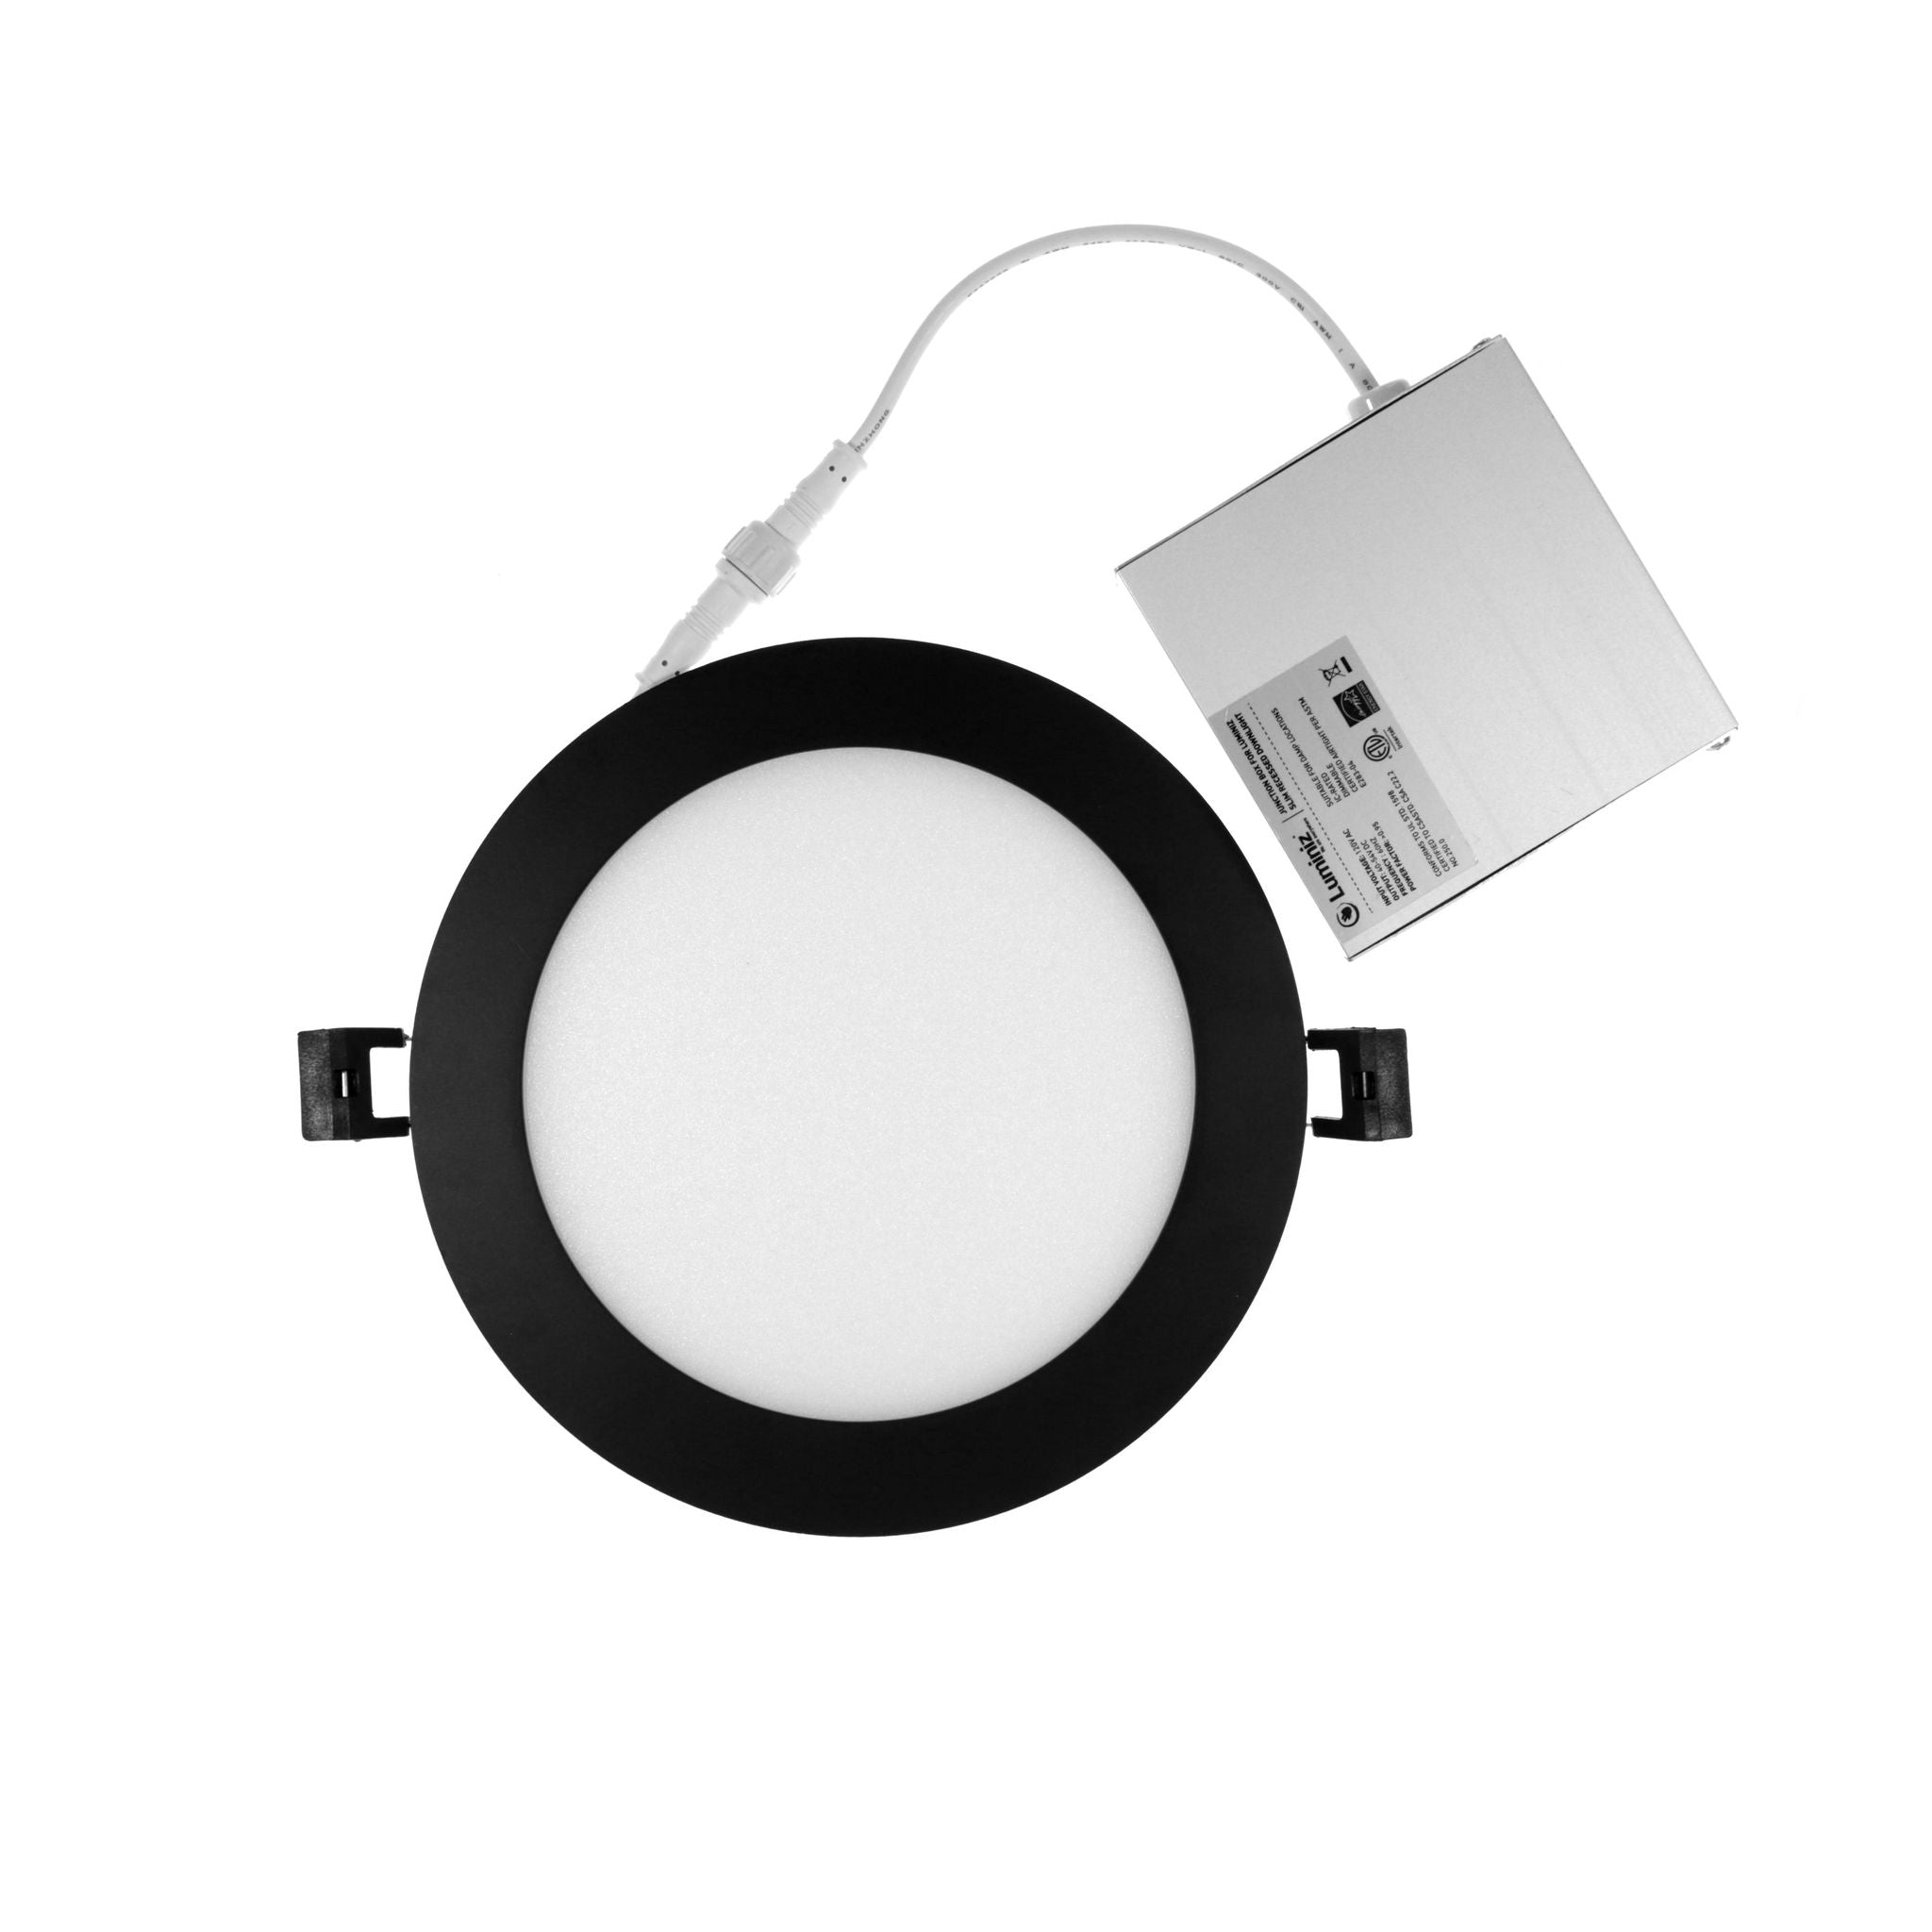 Luminiz 8'' Potlight, Single Color,5000K, junction box included with quick connect. Energy Star, ETL listed. Available in White, Black and Nickel Trim.